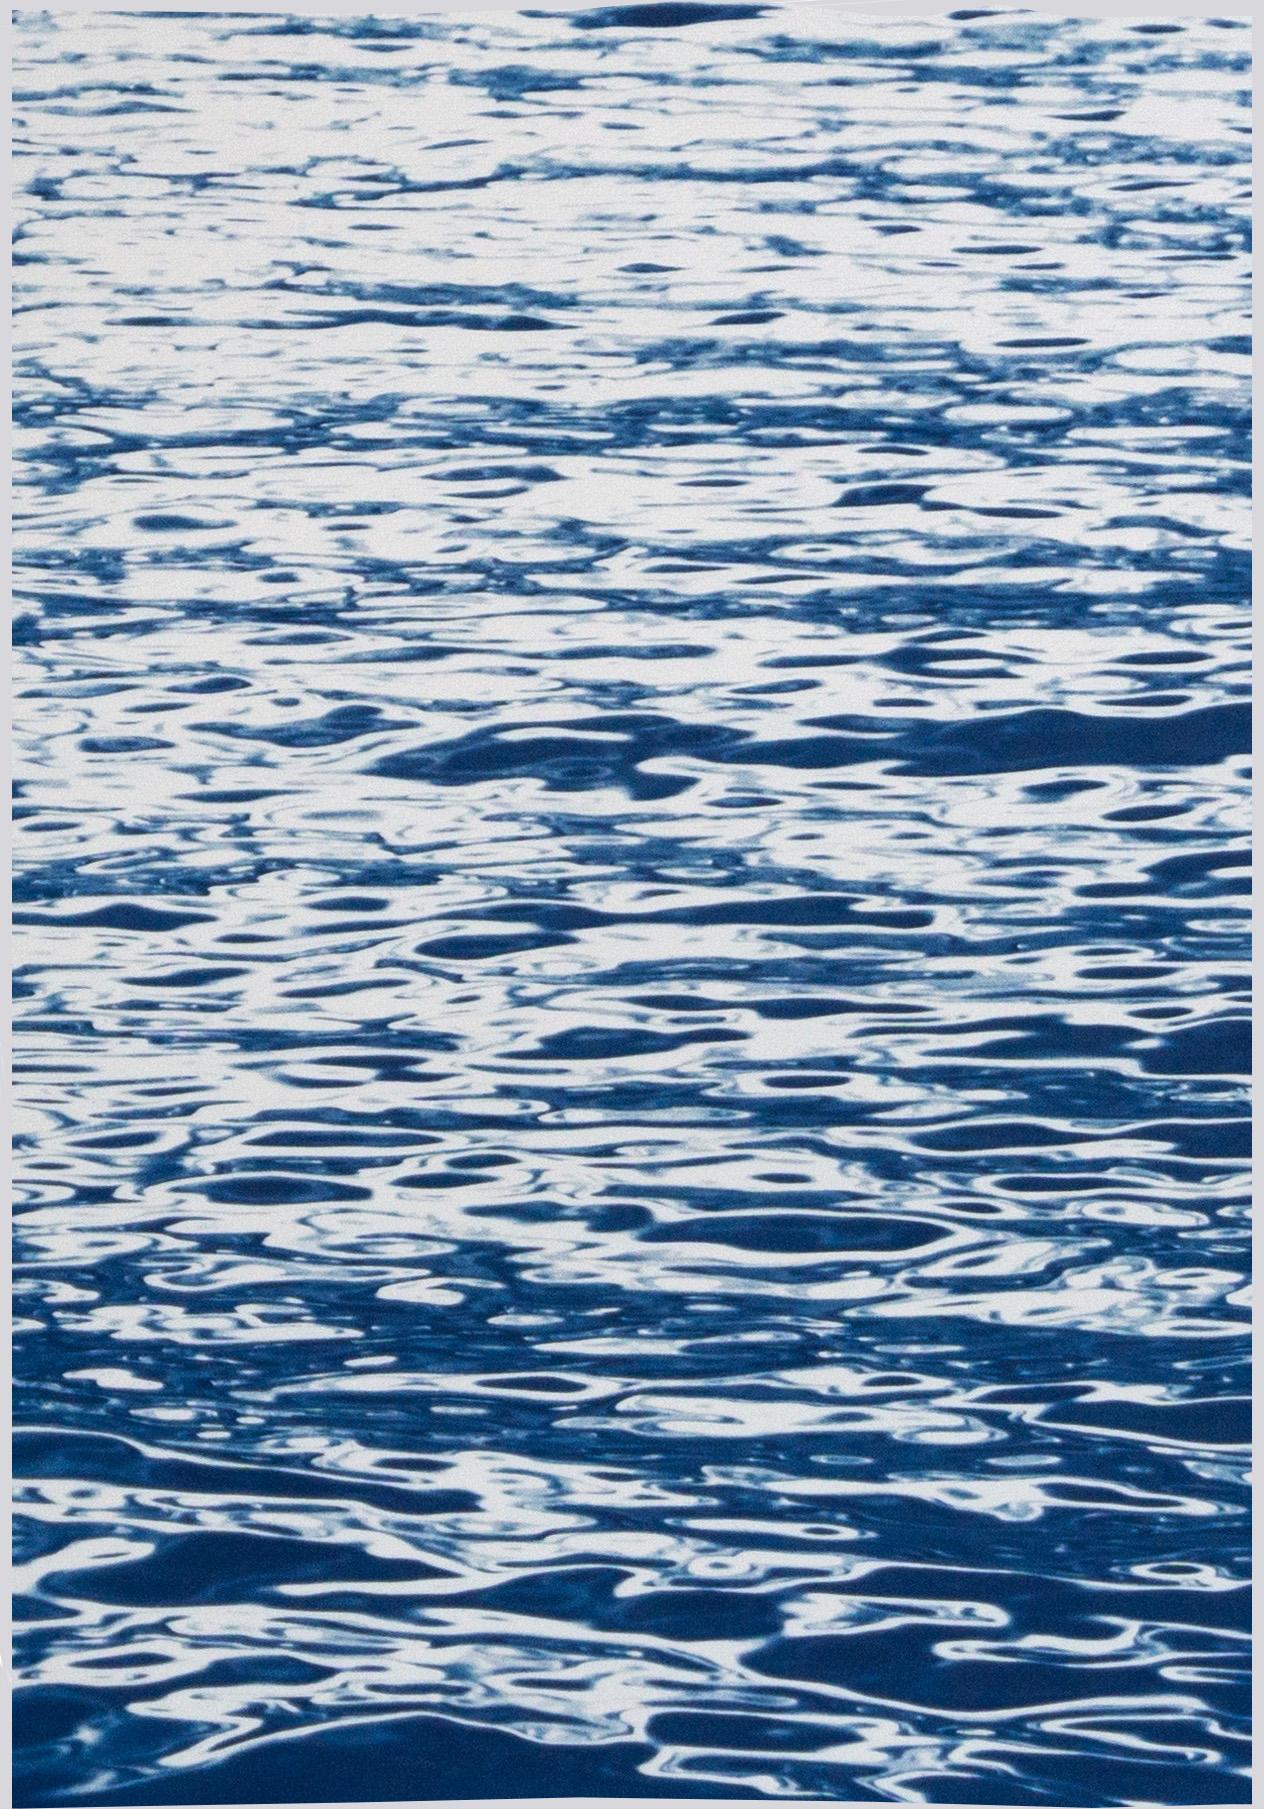 Moonlight Ripples over Lake Como, Nautical Cyanotype Triptych of Moving Water - Blue Abstract Print by Kind of Cyan